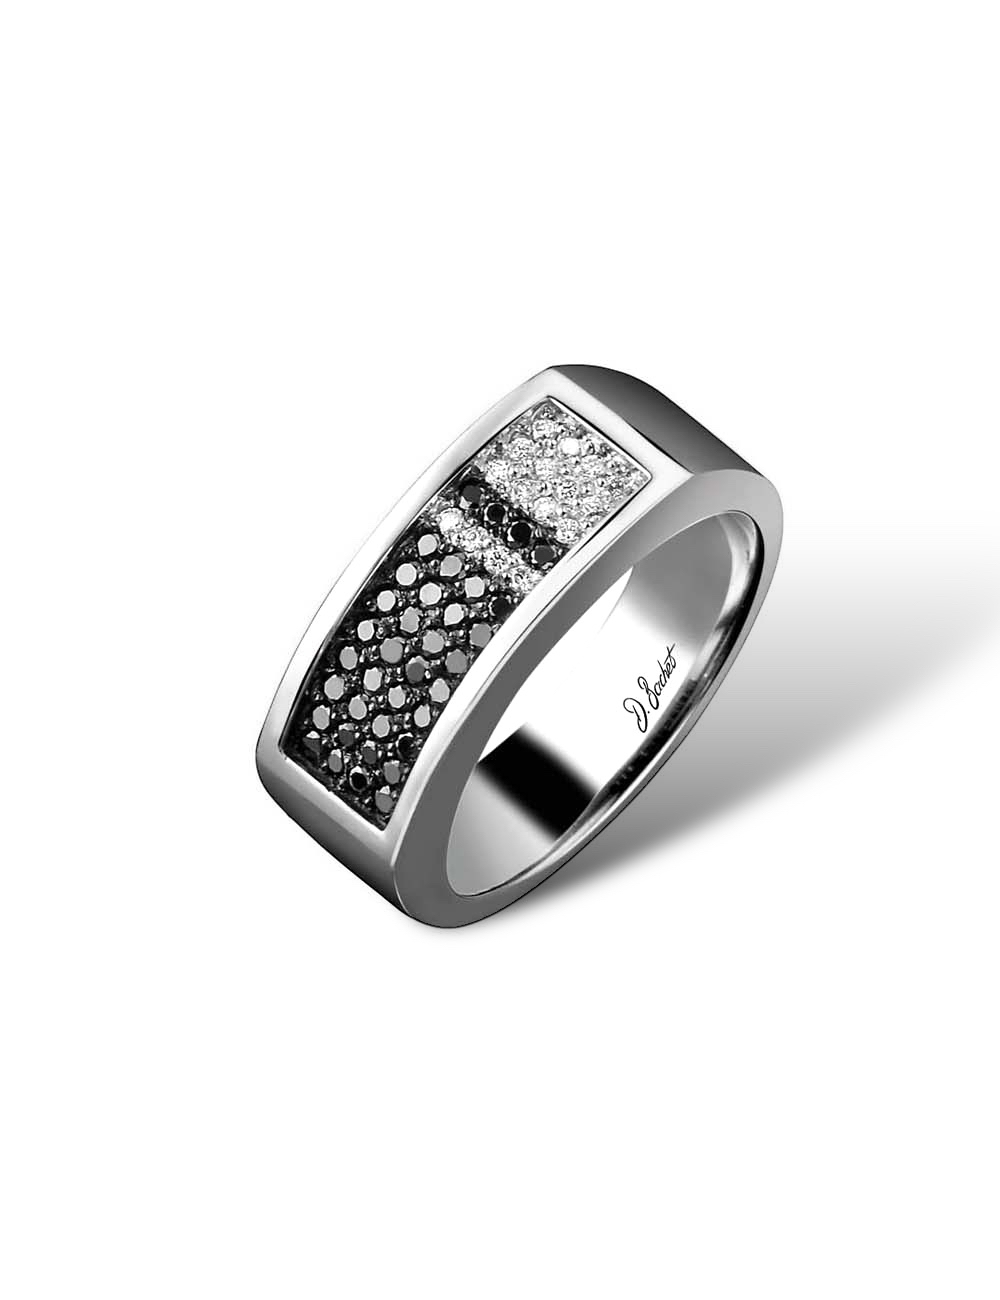 Platinum signet ring with 52 white and black diamonds, embodying strength and confidence, perfect for the audacious man.